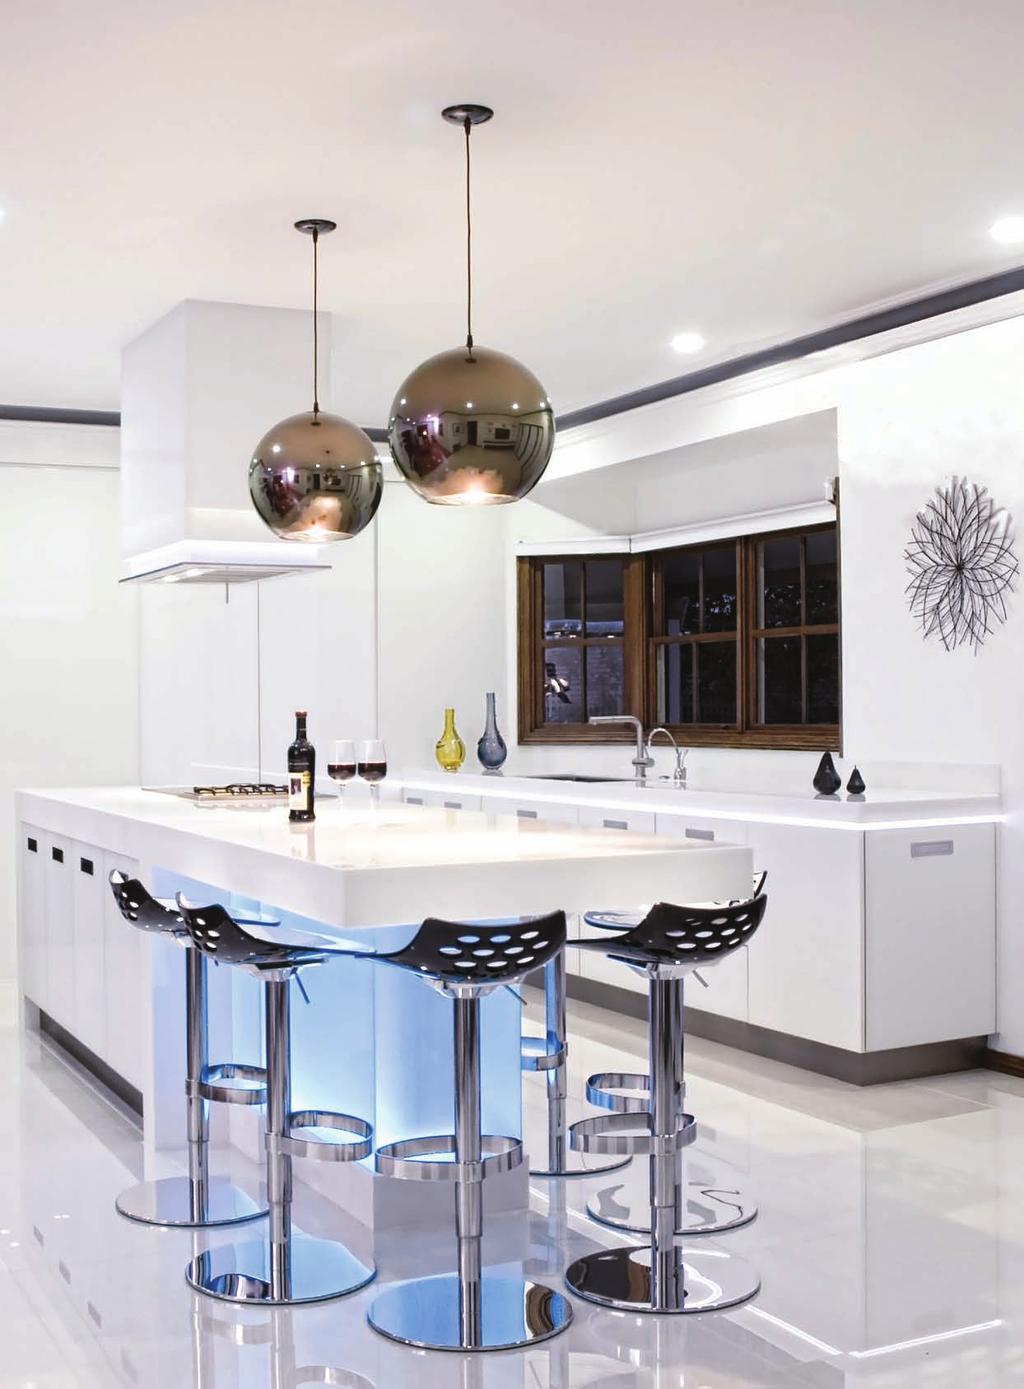 benchtop. With a selection of four single and three double kitchen sinks a seamless and totally integrated kitchen benchtop space can be created.